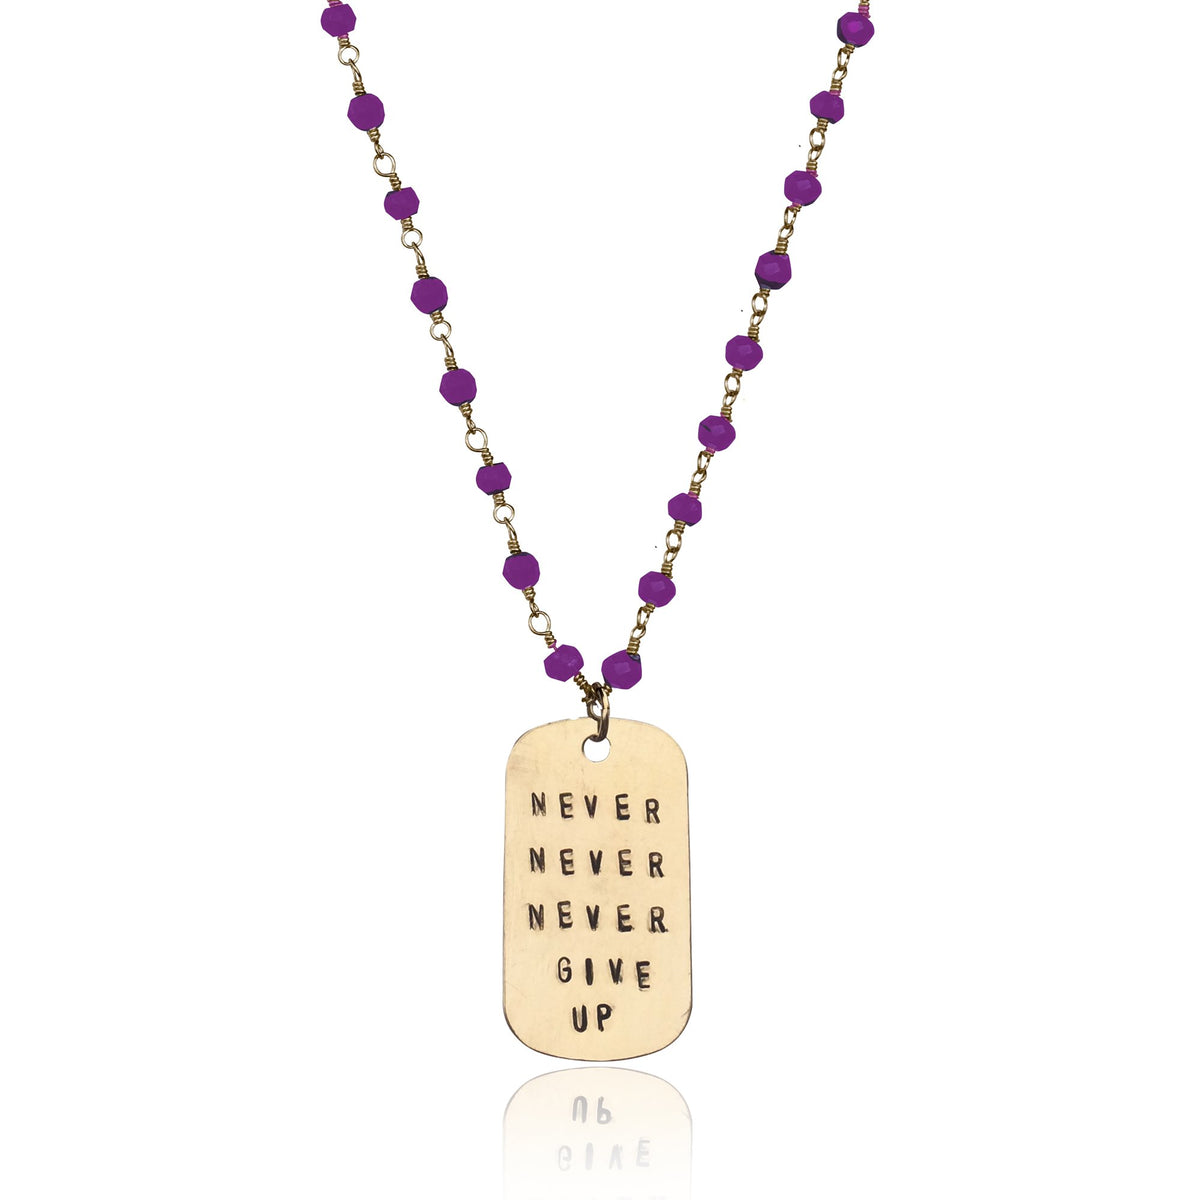 Inspirational Gold Filled Never Give Up Dog Tag on Gold Filled Wire Wrapped Amethyst Necklace.